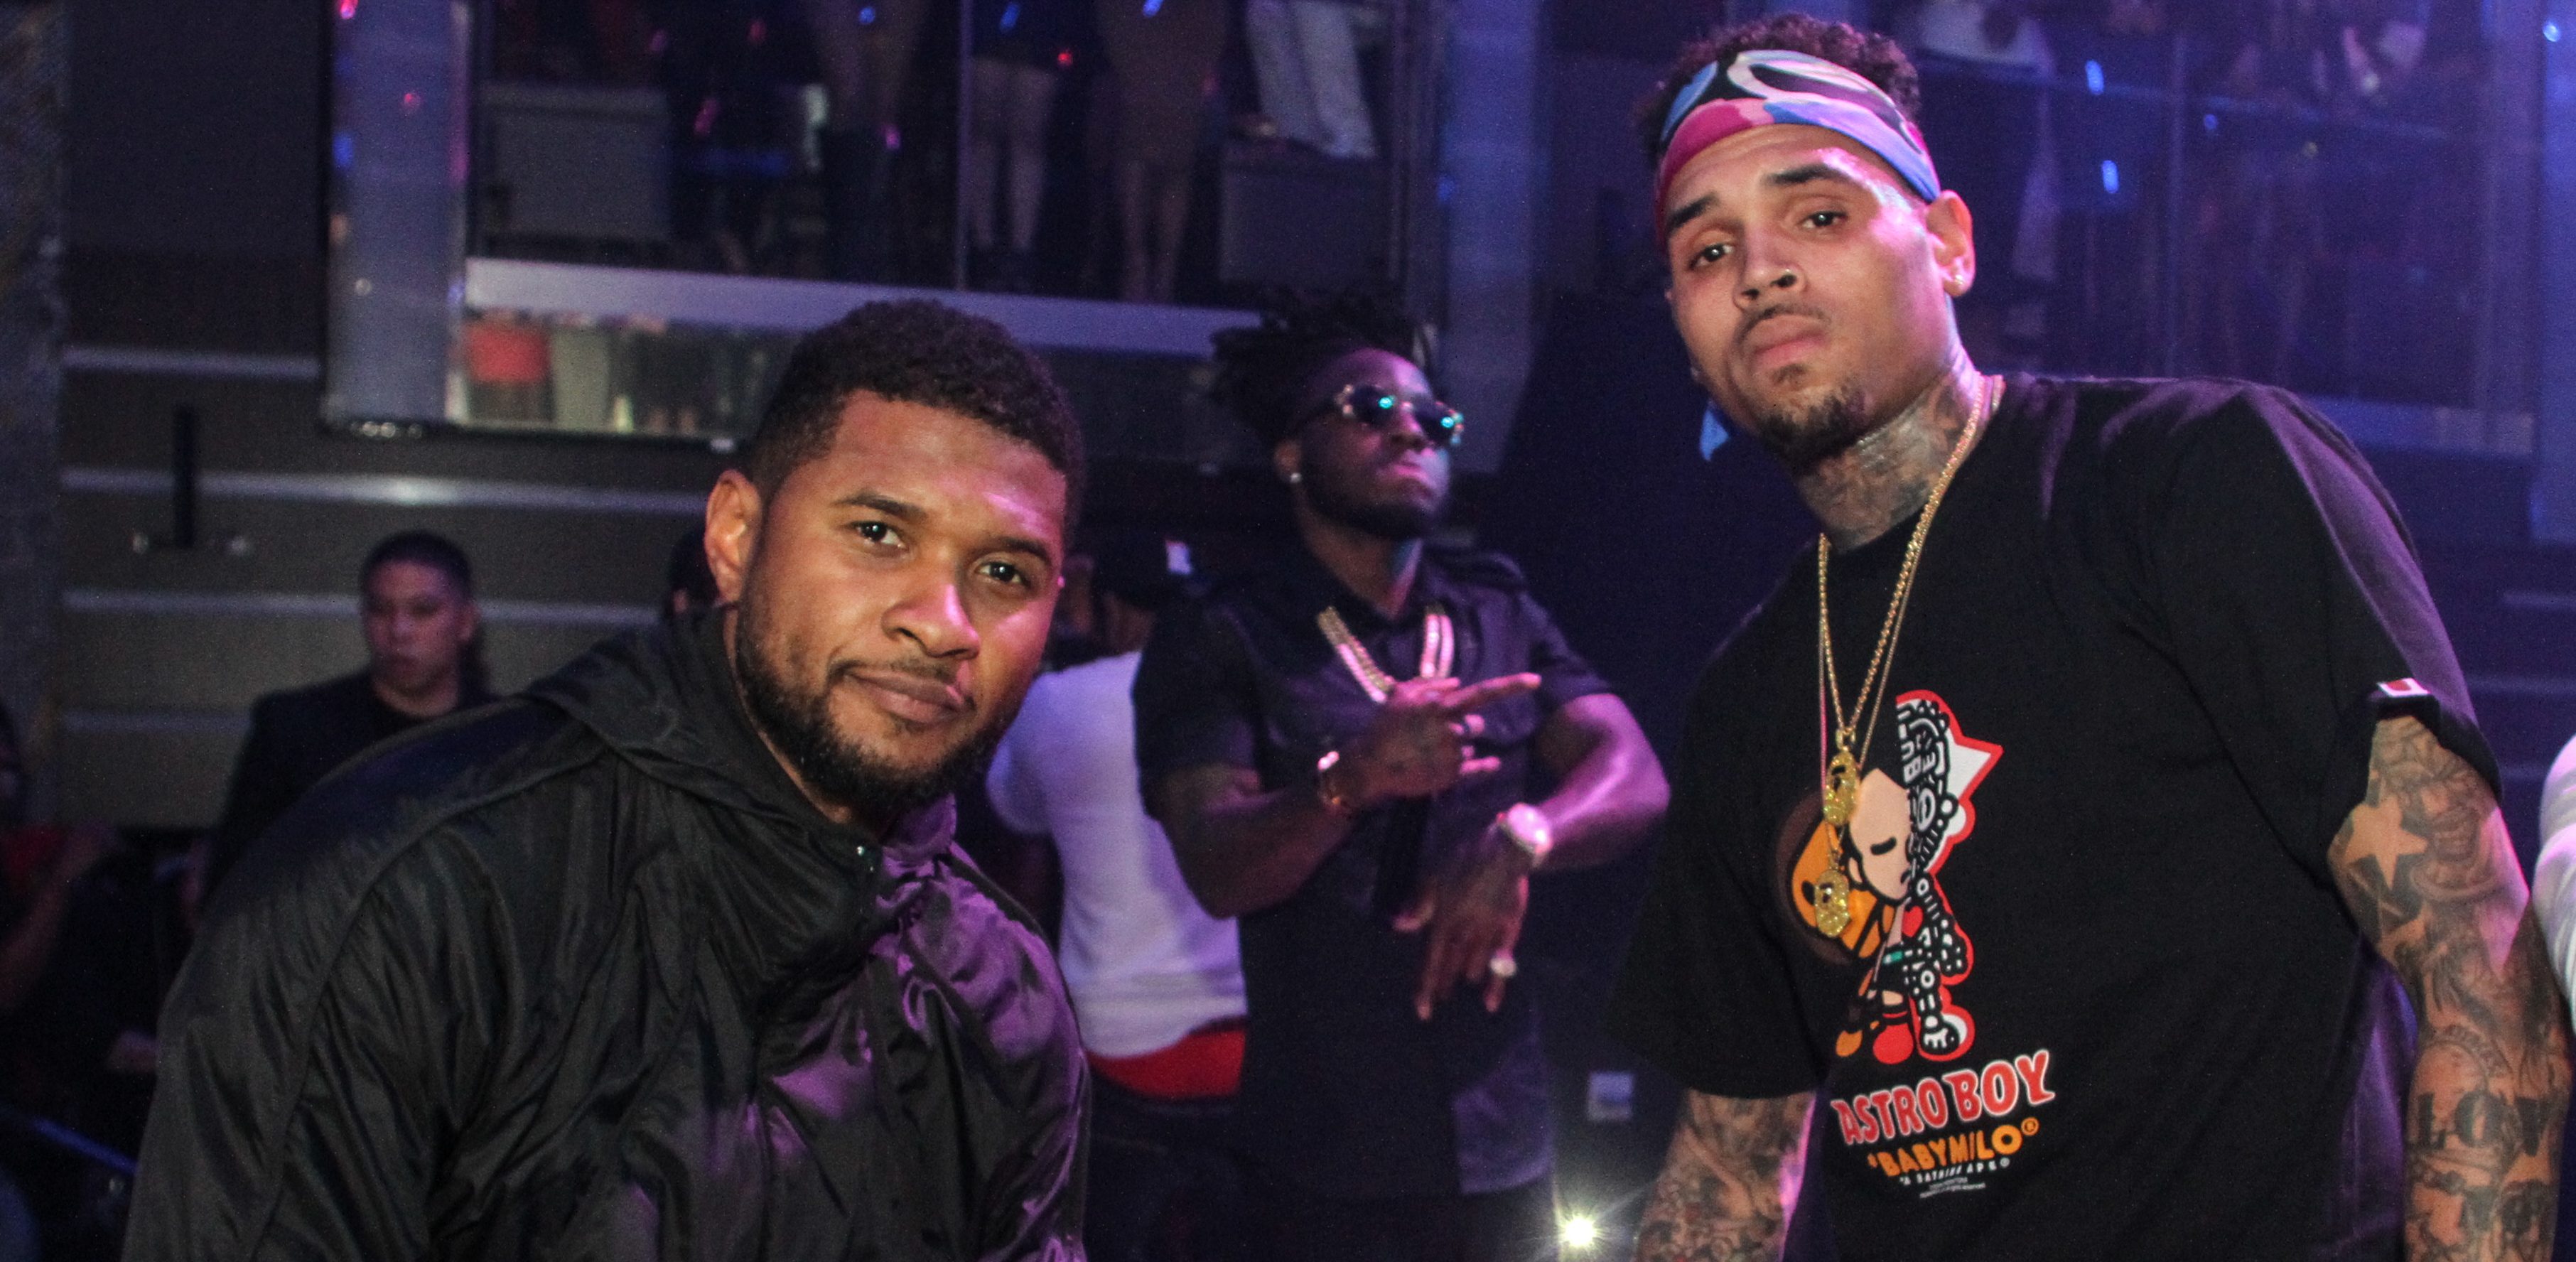 Chris Brown & His Crew Allegedly Jumped Usher At Birthday Party, Twitter Reacts